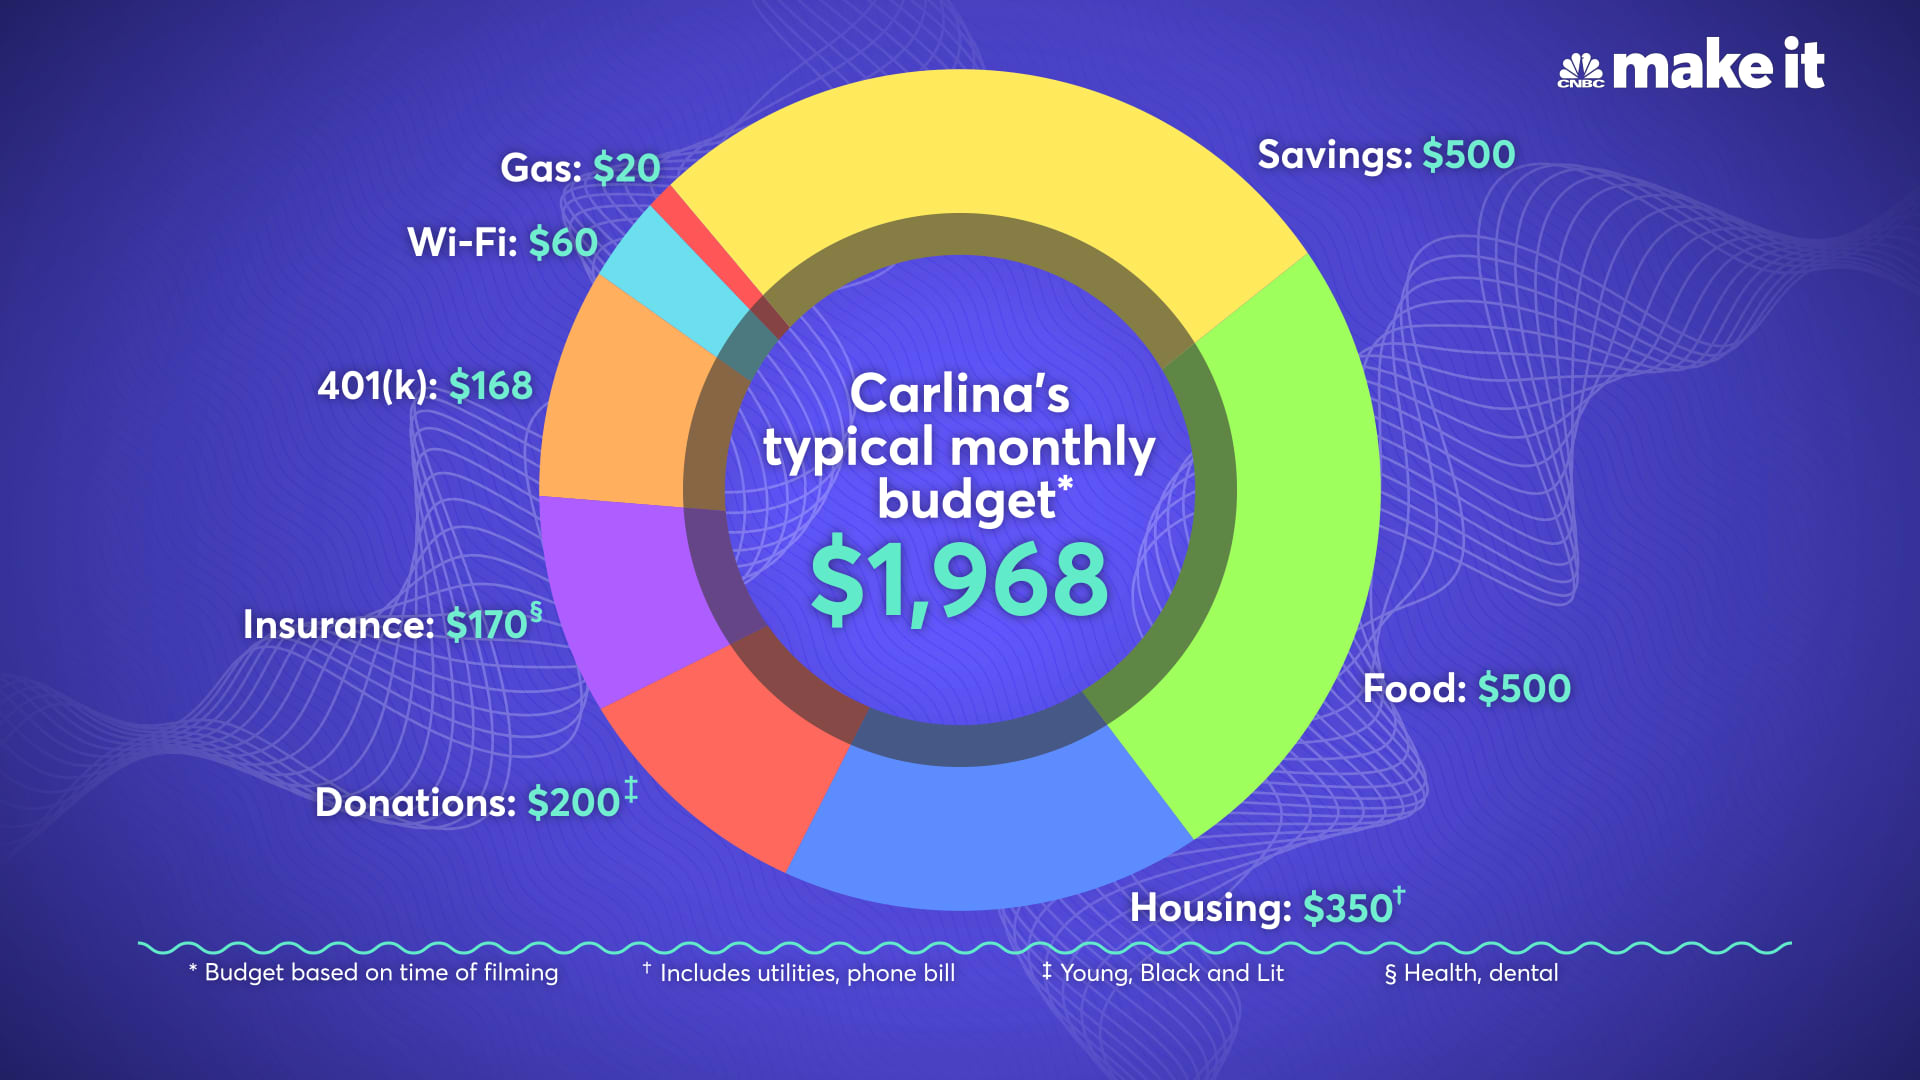 Carlina Williams' typical monthly budget